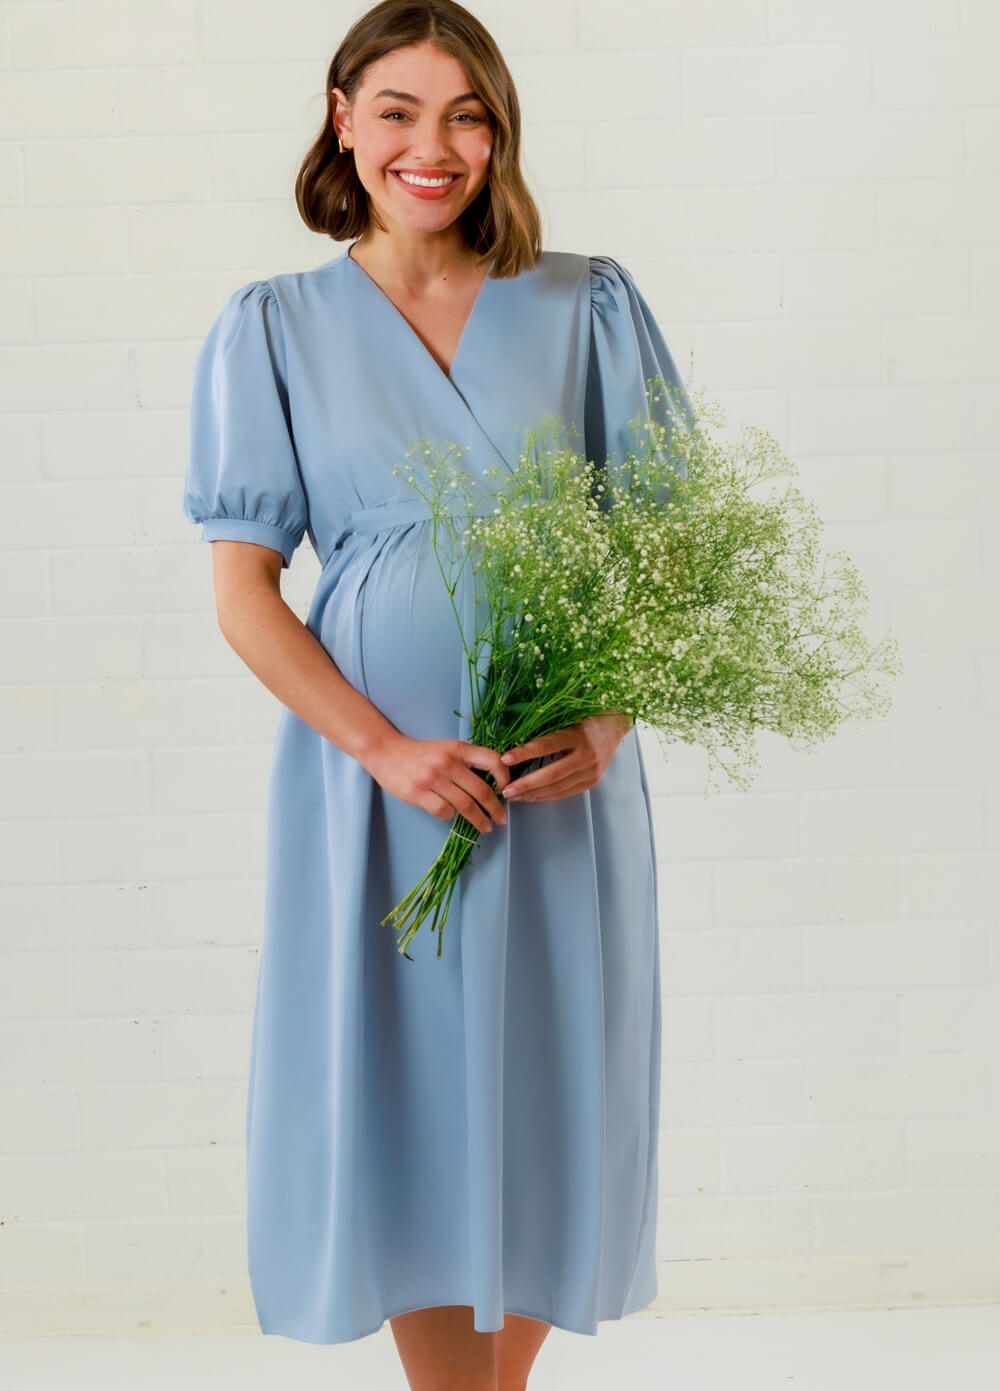 Lait & Co - Anna-Elea Maternity Cocktail Party Dress in Blue